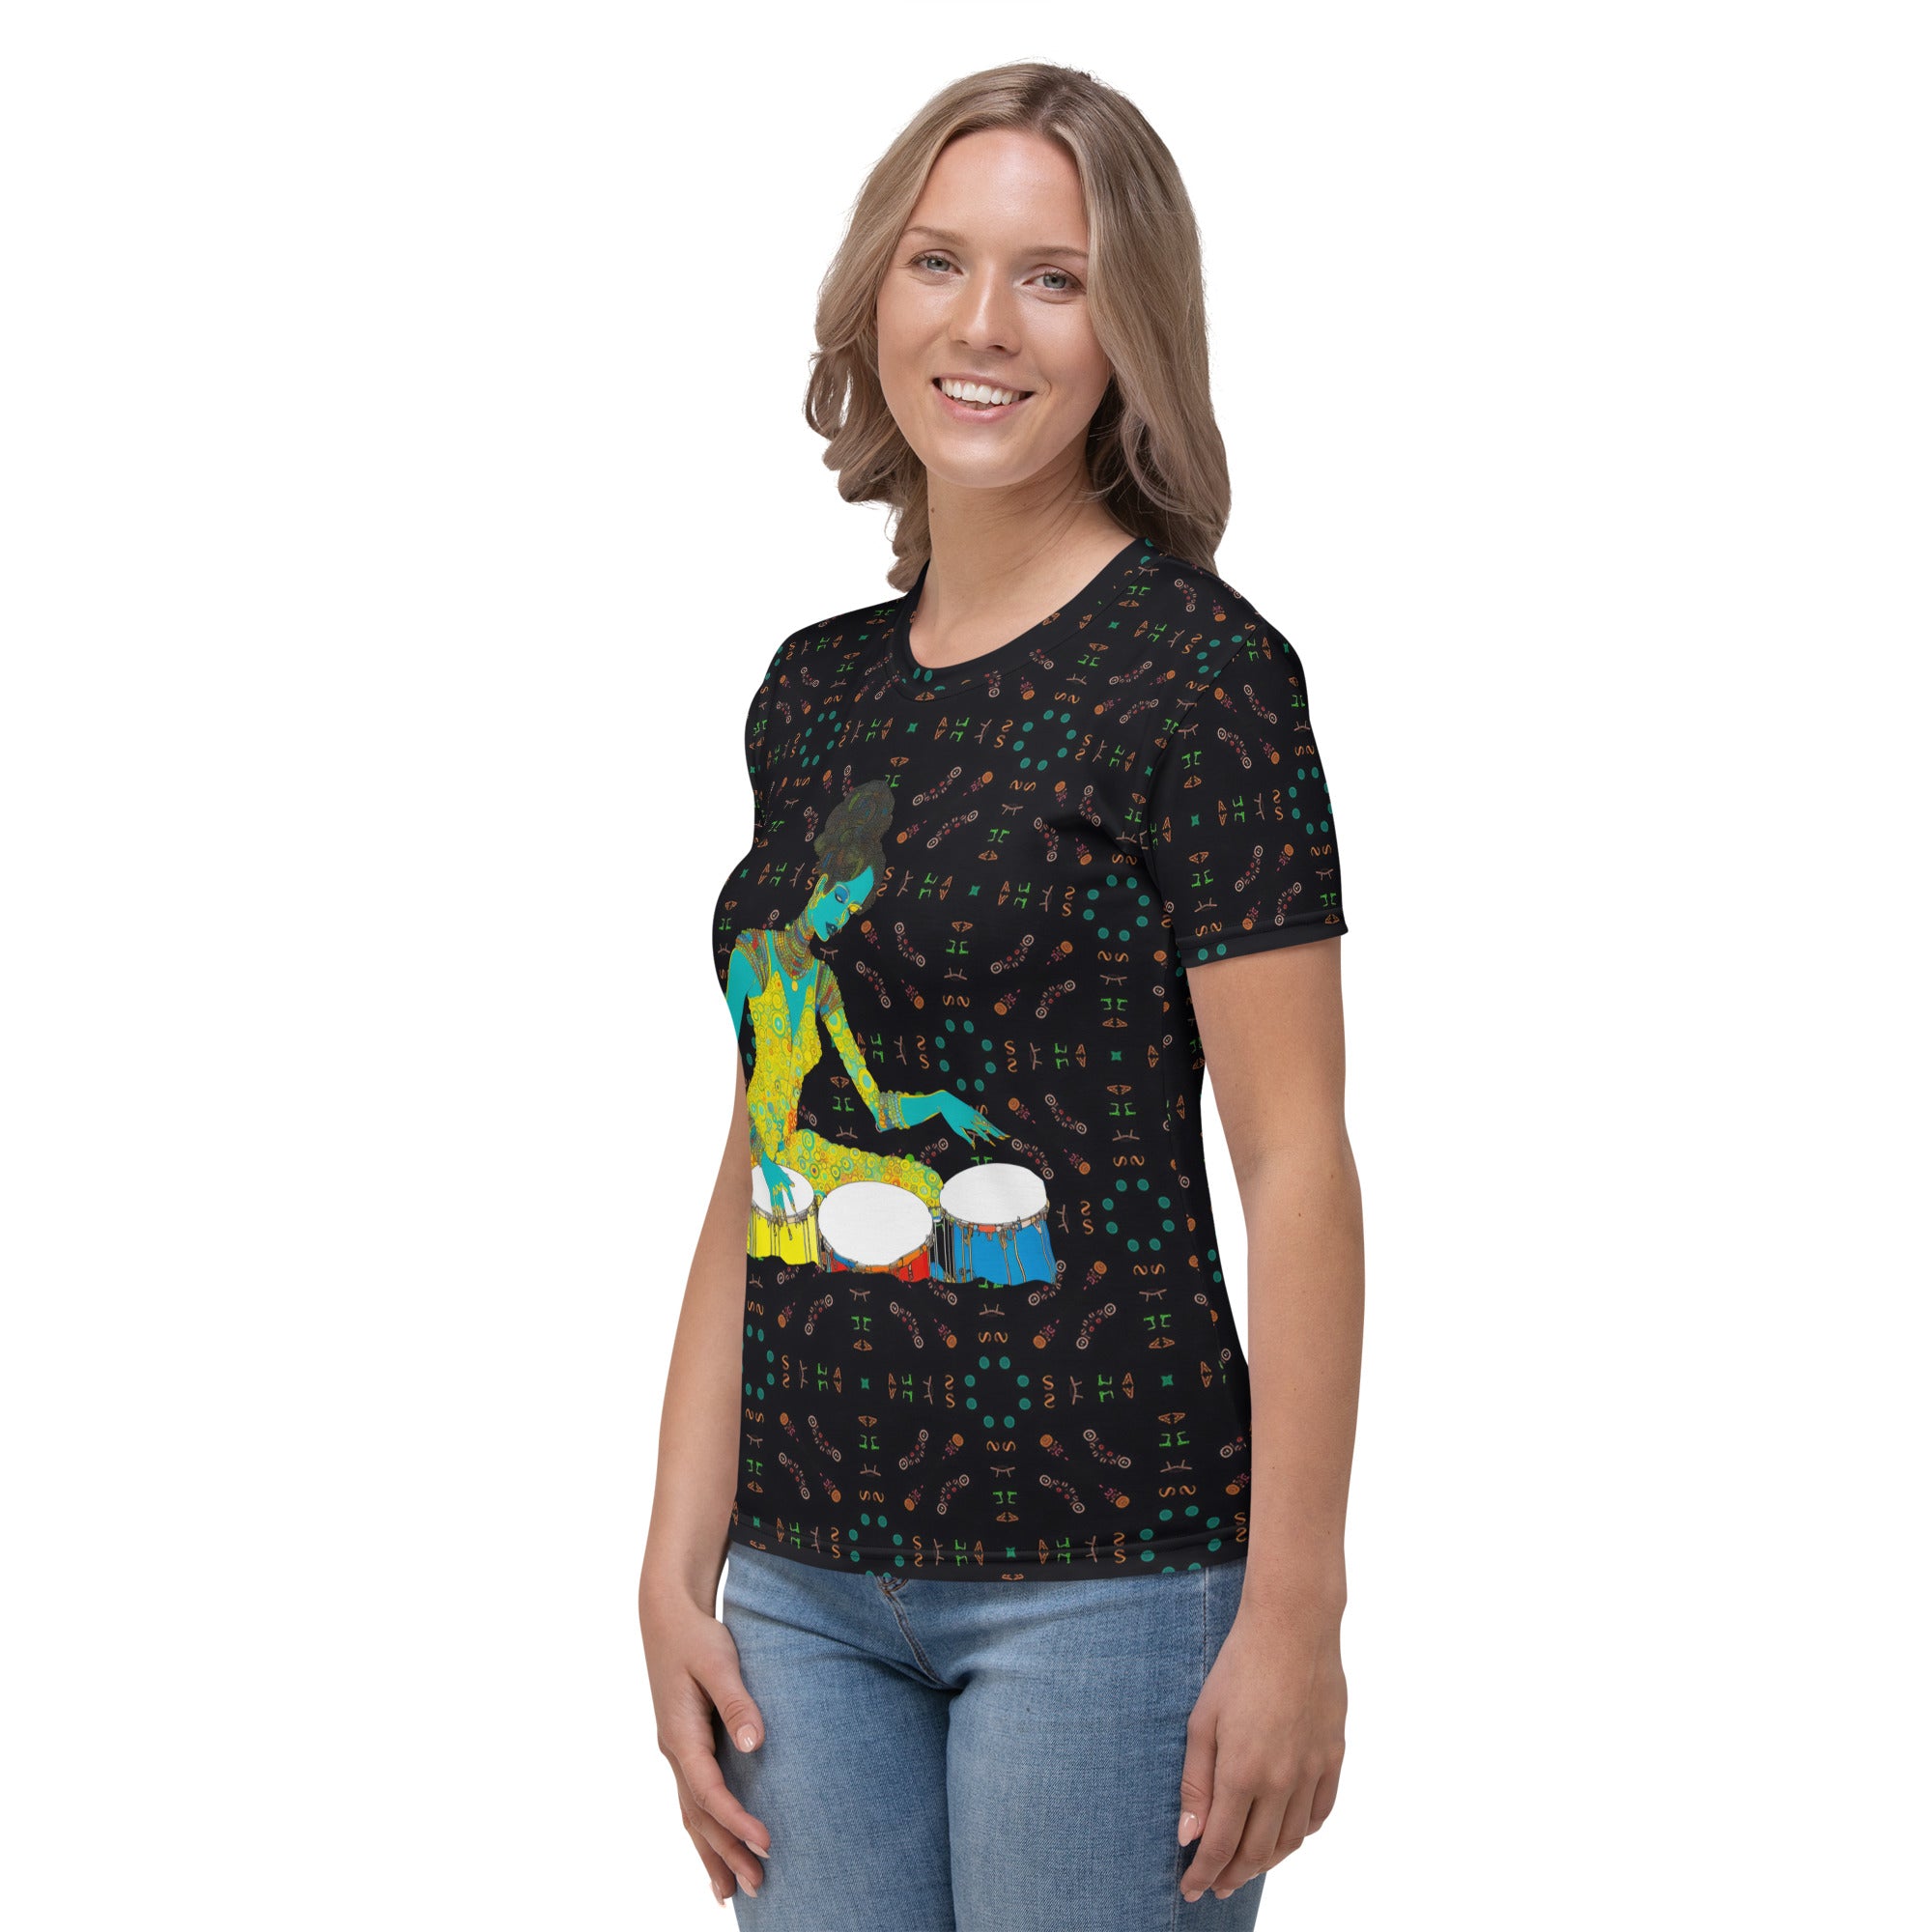 Botanical Peace Bliss Women's Crew Neck T-Shirt on a clothing mannequin.